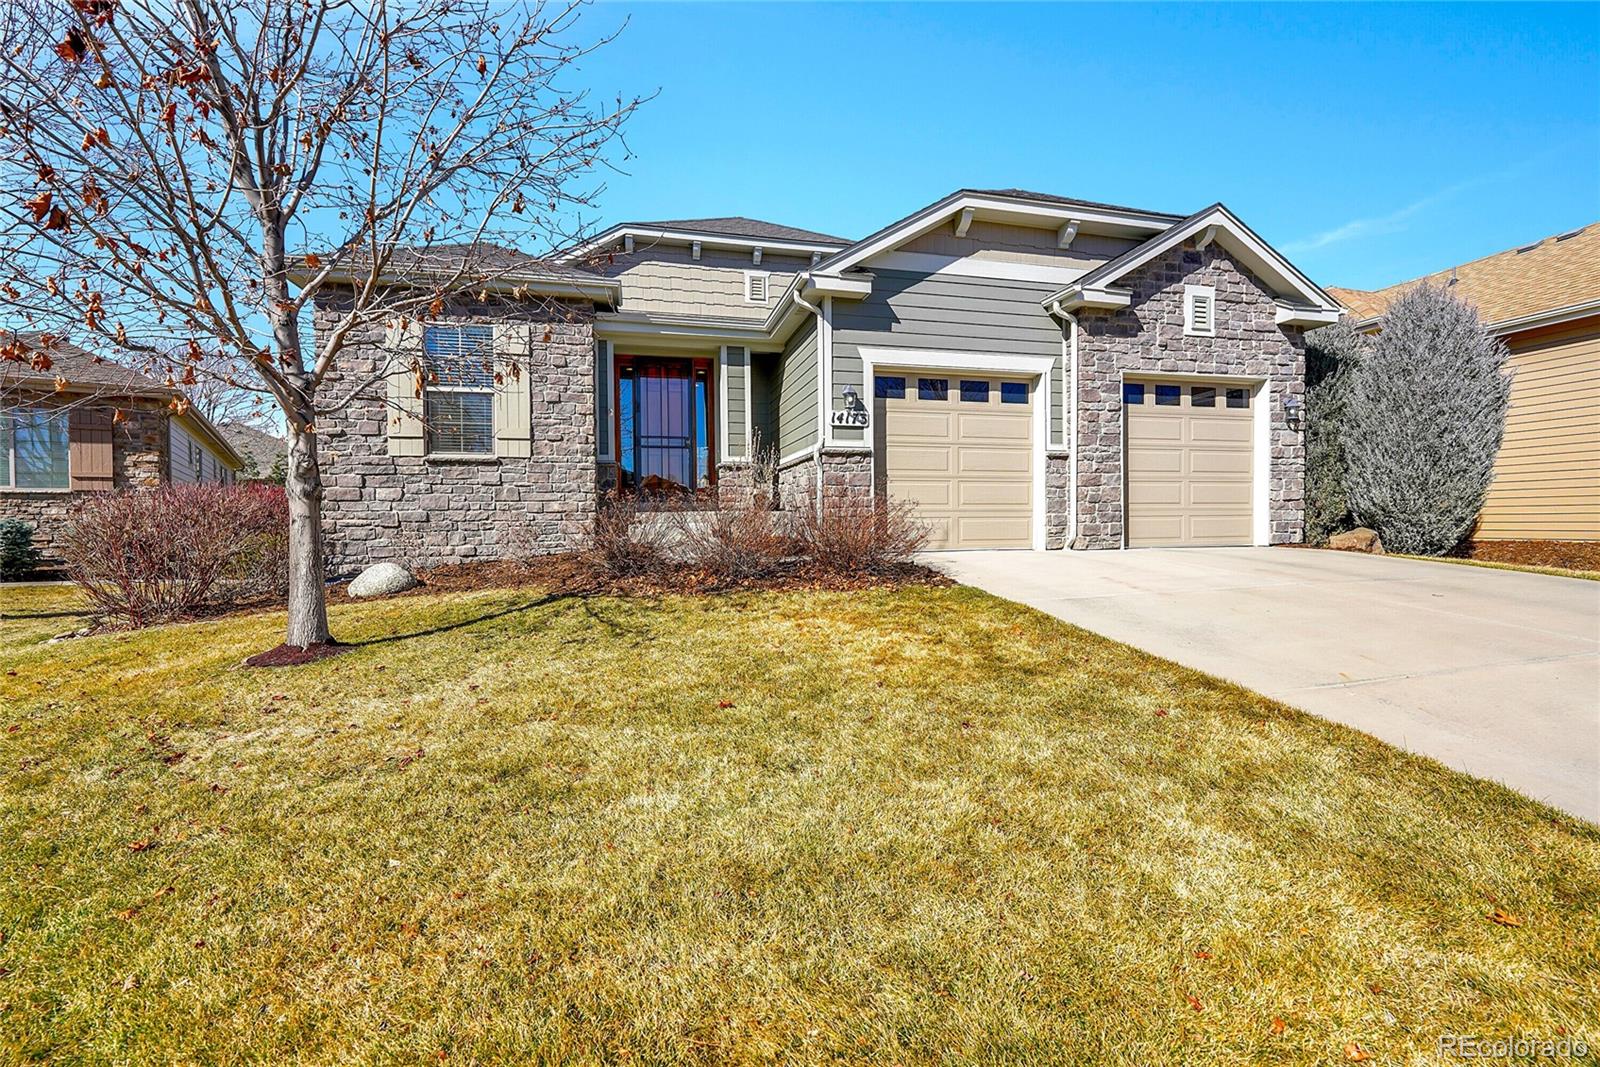 14173  davies way, broomfield sold home. Closed on 2024-04-11 for $845,000.